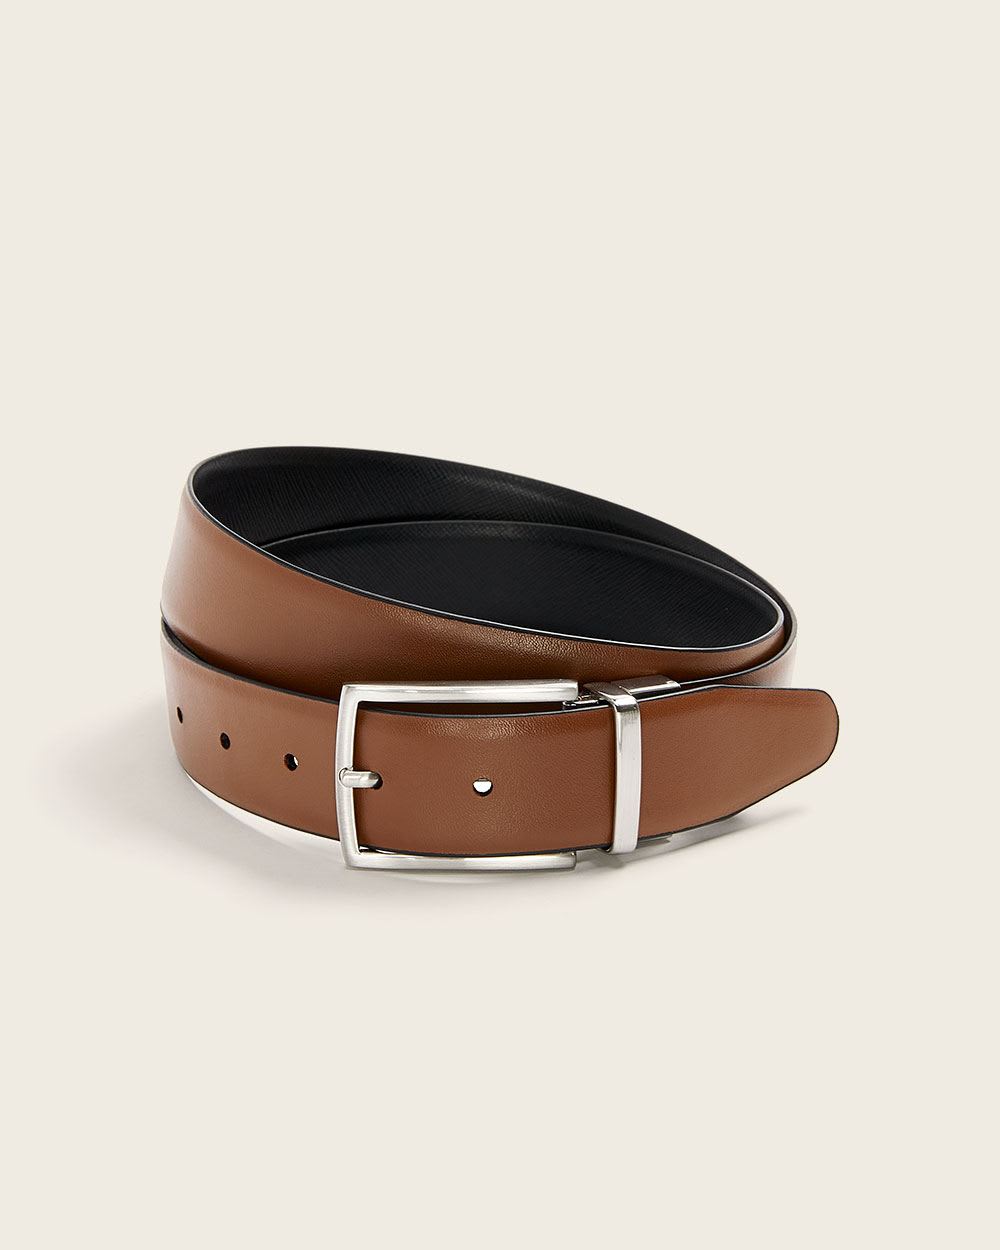 Reversible Black and Tan Leather Belt